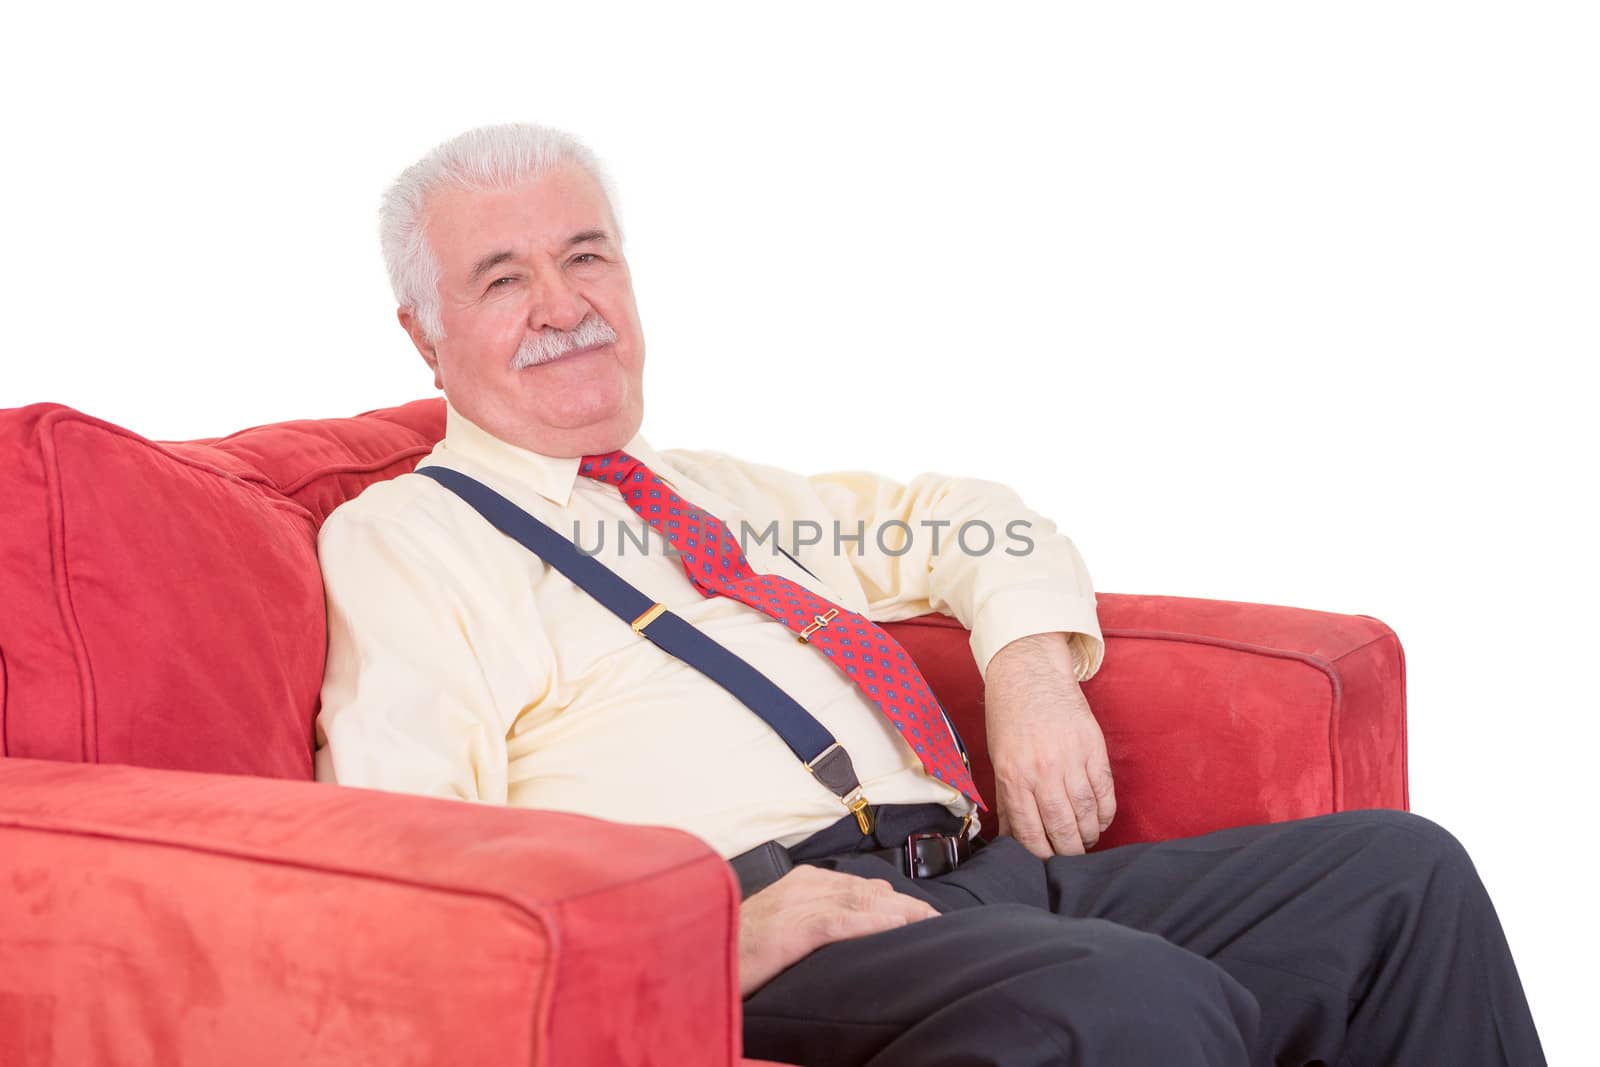 Senior grey-haired gentleman with a moustache wearing braces relaxing in a comfortable red armchair on a white background